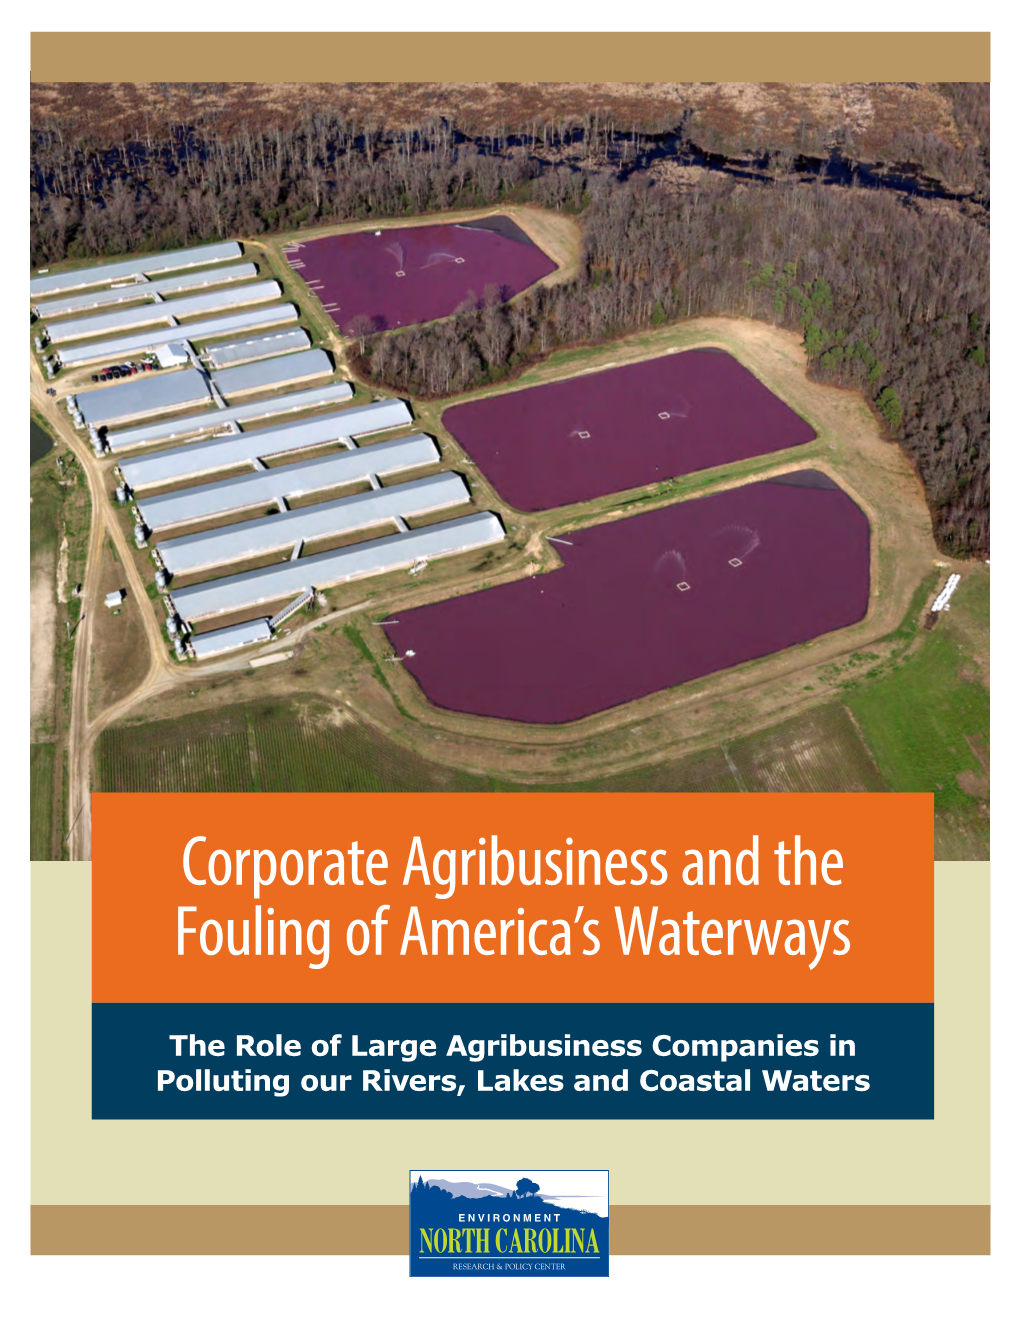 Corporate Agribusiness and the Fouling of America's Waterways